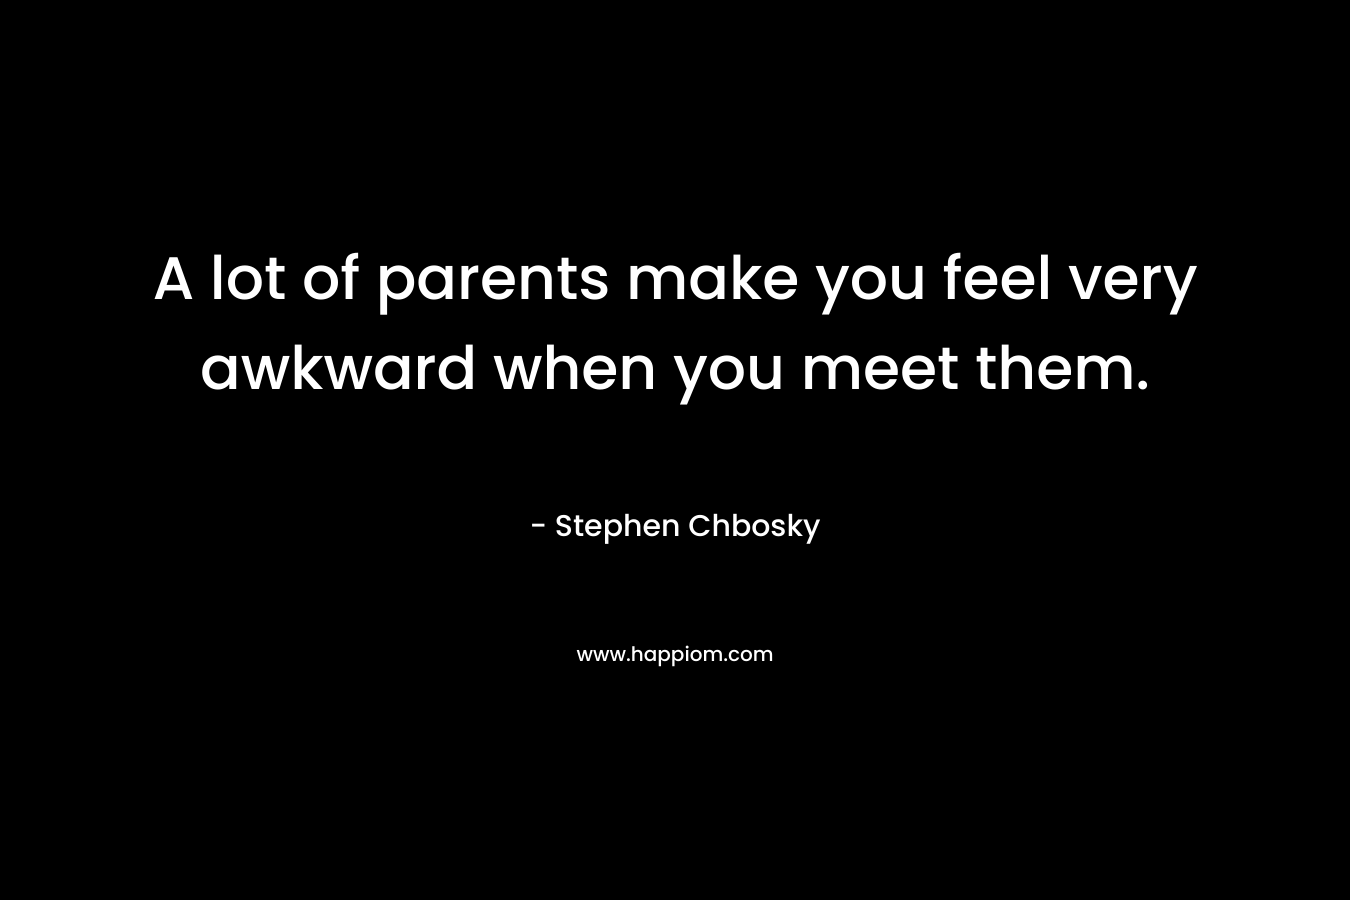 A lot of parents make you feel very awkward when you meet them. – Stephen Chbosky